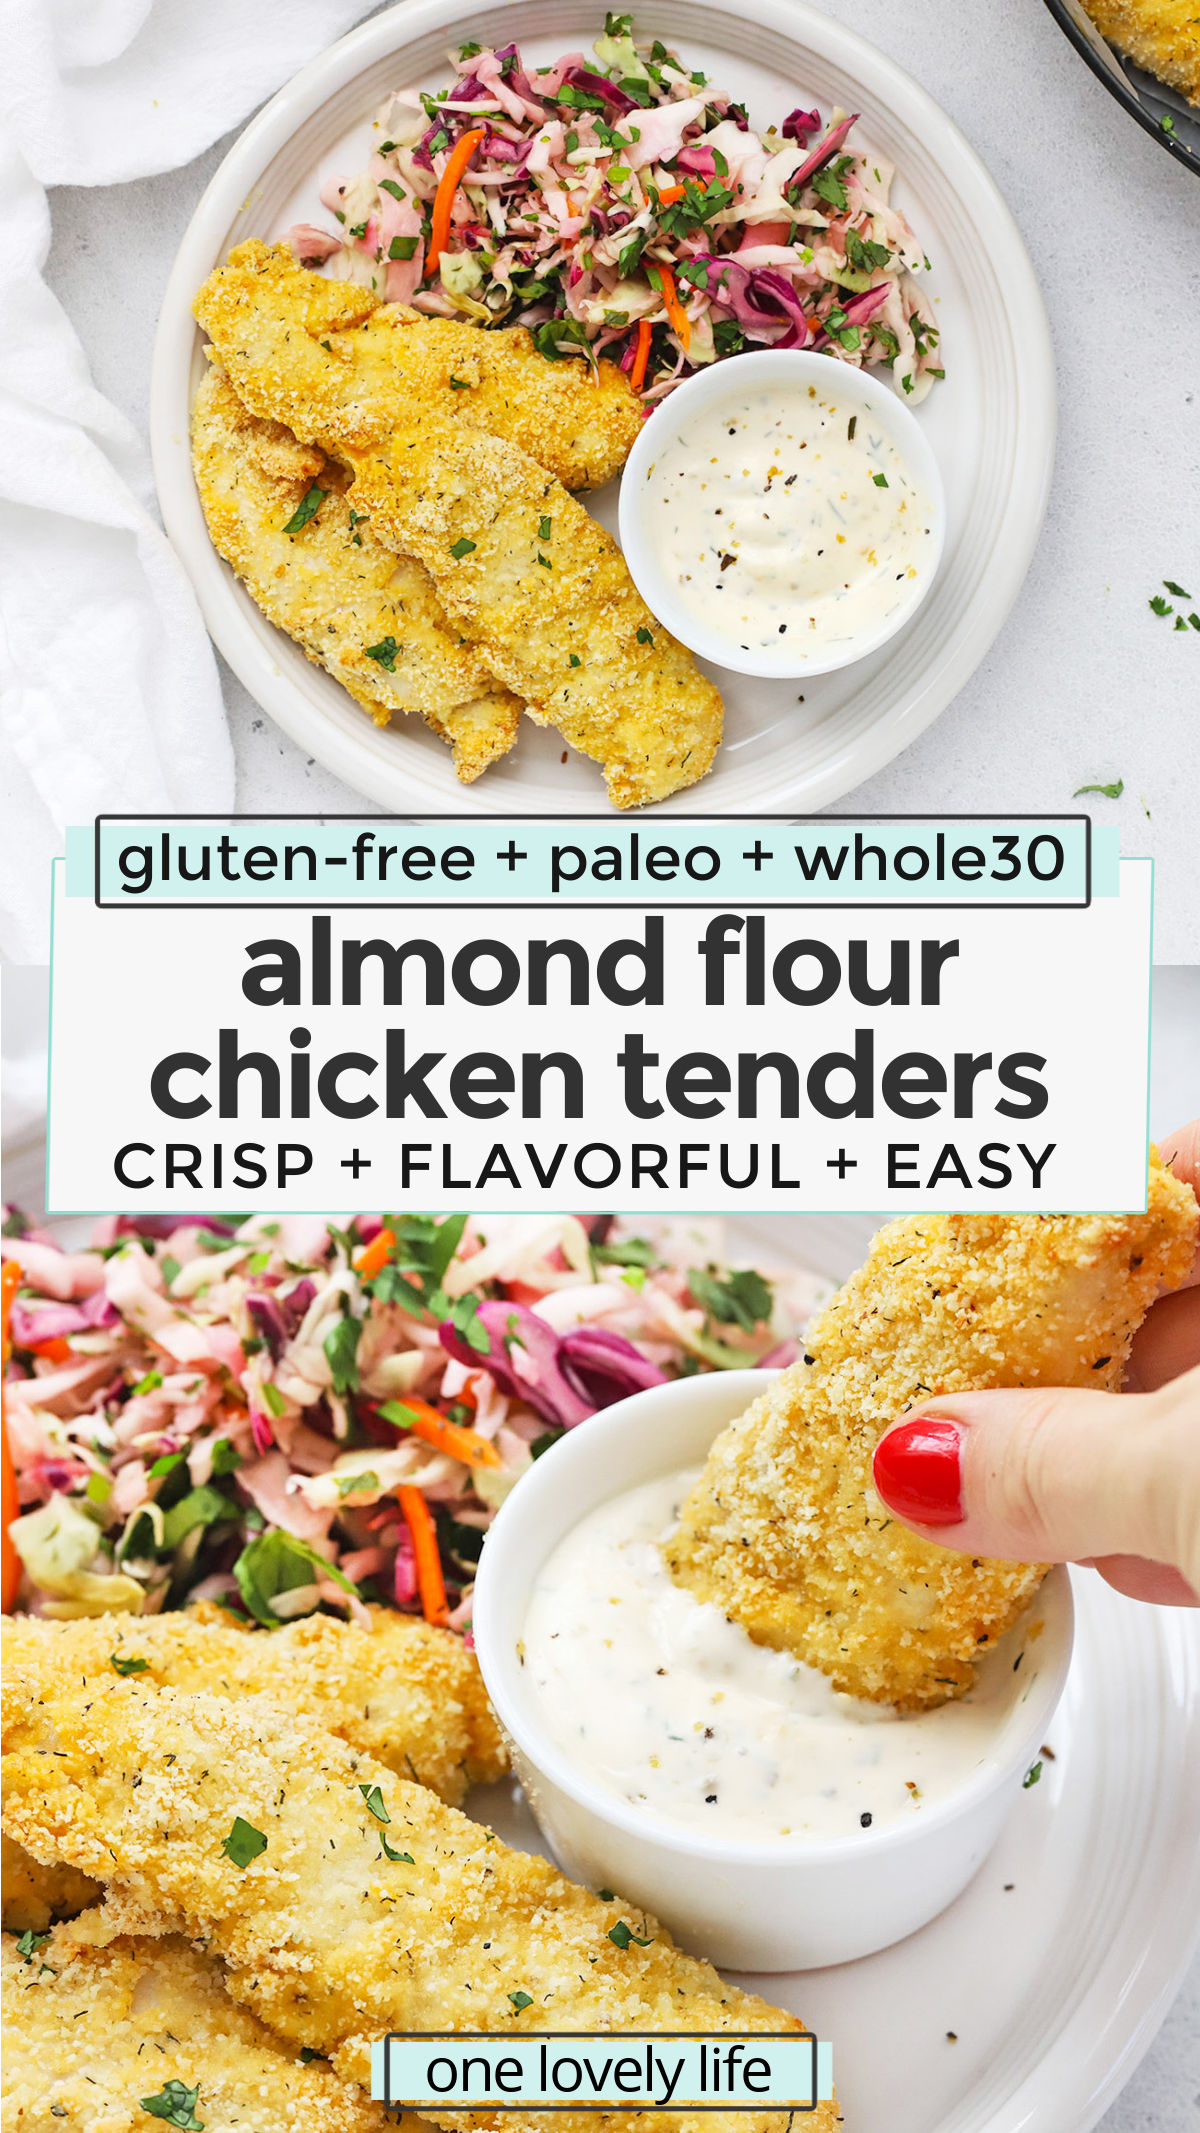 Almond Flour Chicken Tenders - These healthy chicken tenders are breaded with seasoned almond flour and cooked to perfection. Enjoy them on their own, or try them with one of our dipping sauces below! (Paleo, Whole30, Gluten-Free) // Paleo Chicken Tenders // Whole30 Chicken Tenders // Crispy Chicken Tenders // Gluten Free Chicken Tenders // Paleo dinner // Whole30 dinner #easydinner #whole30 #paleo #glutenfree #almondflour #lowcarb #chickentenders